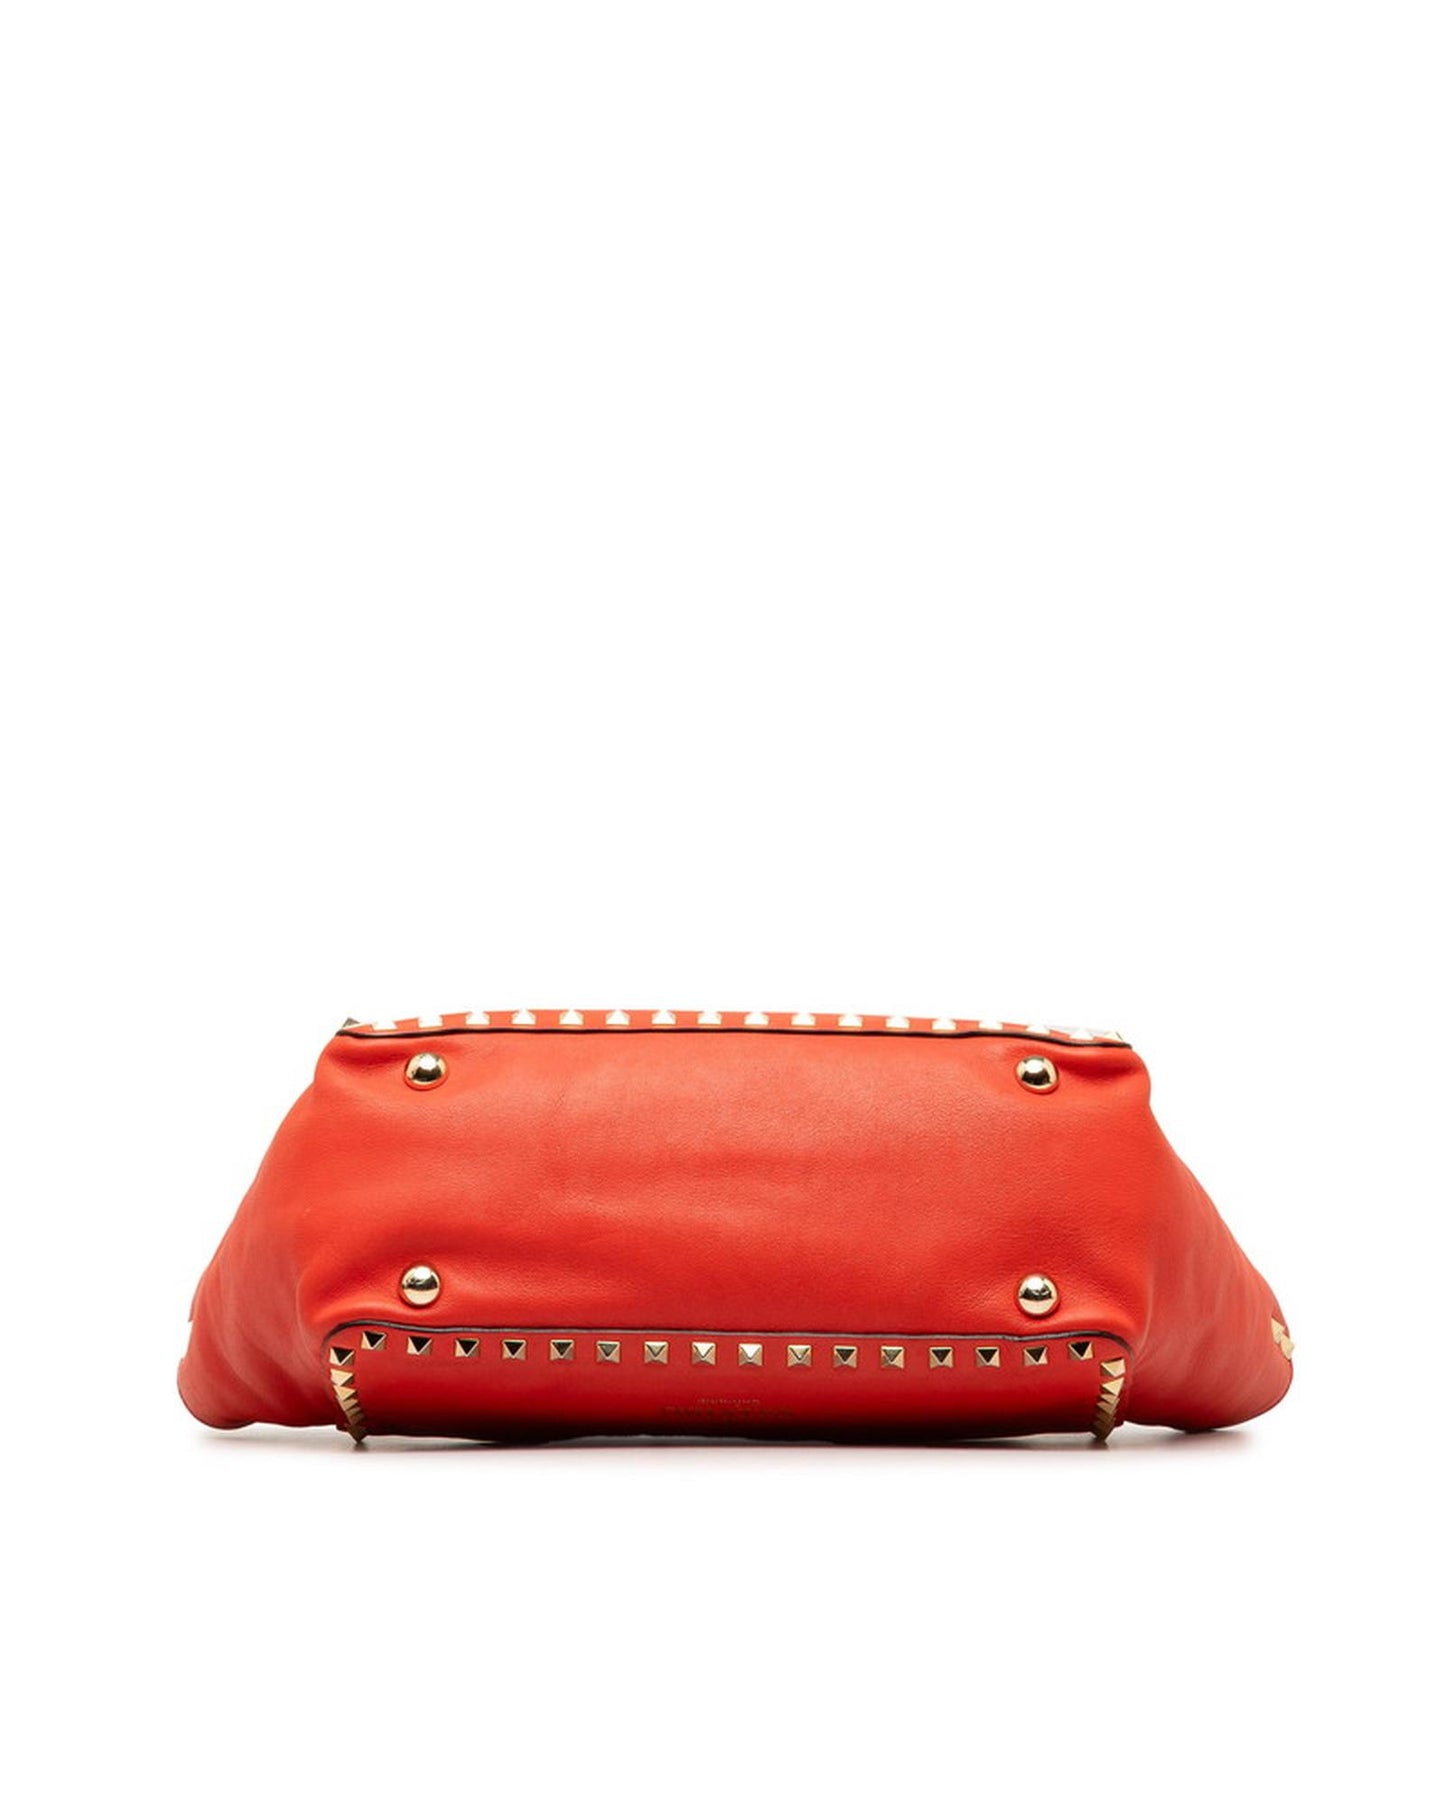 Valentino Women's Leather Rockstud Tote Bag by RedValentino in Red